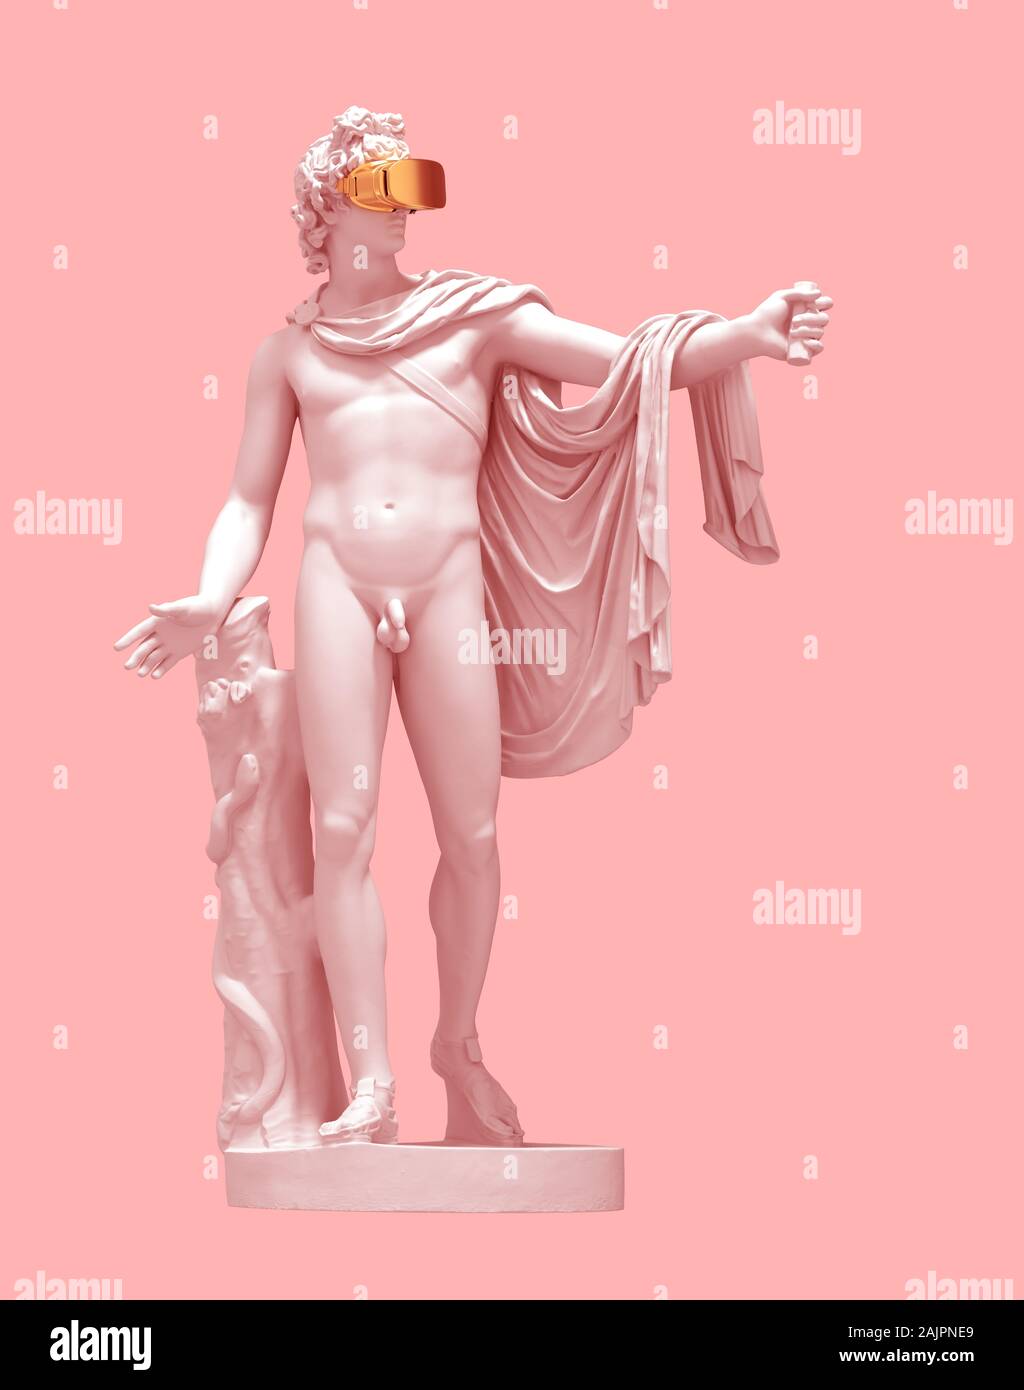 3D Model Apollo With Golden Virtual Reality Glasses On Pink Background. Concept Of Art And Virtual Reality. Stock Photo